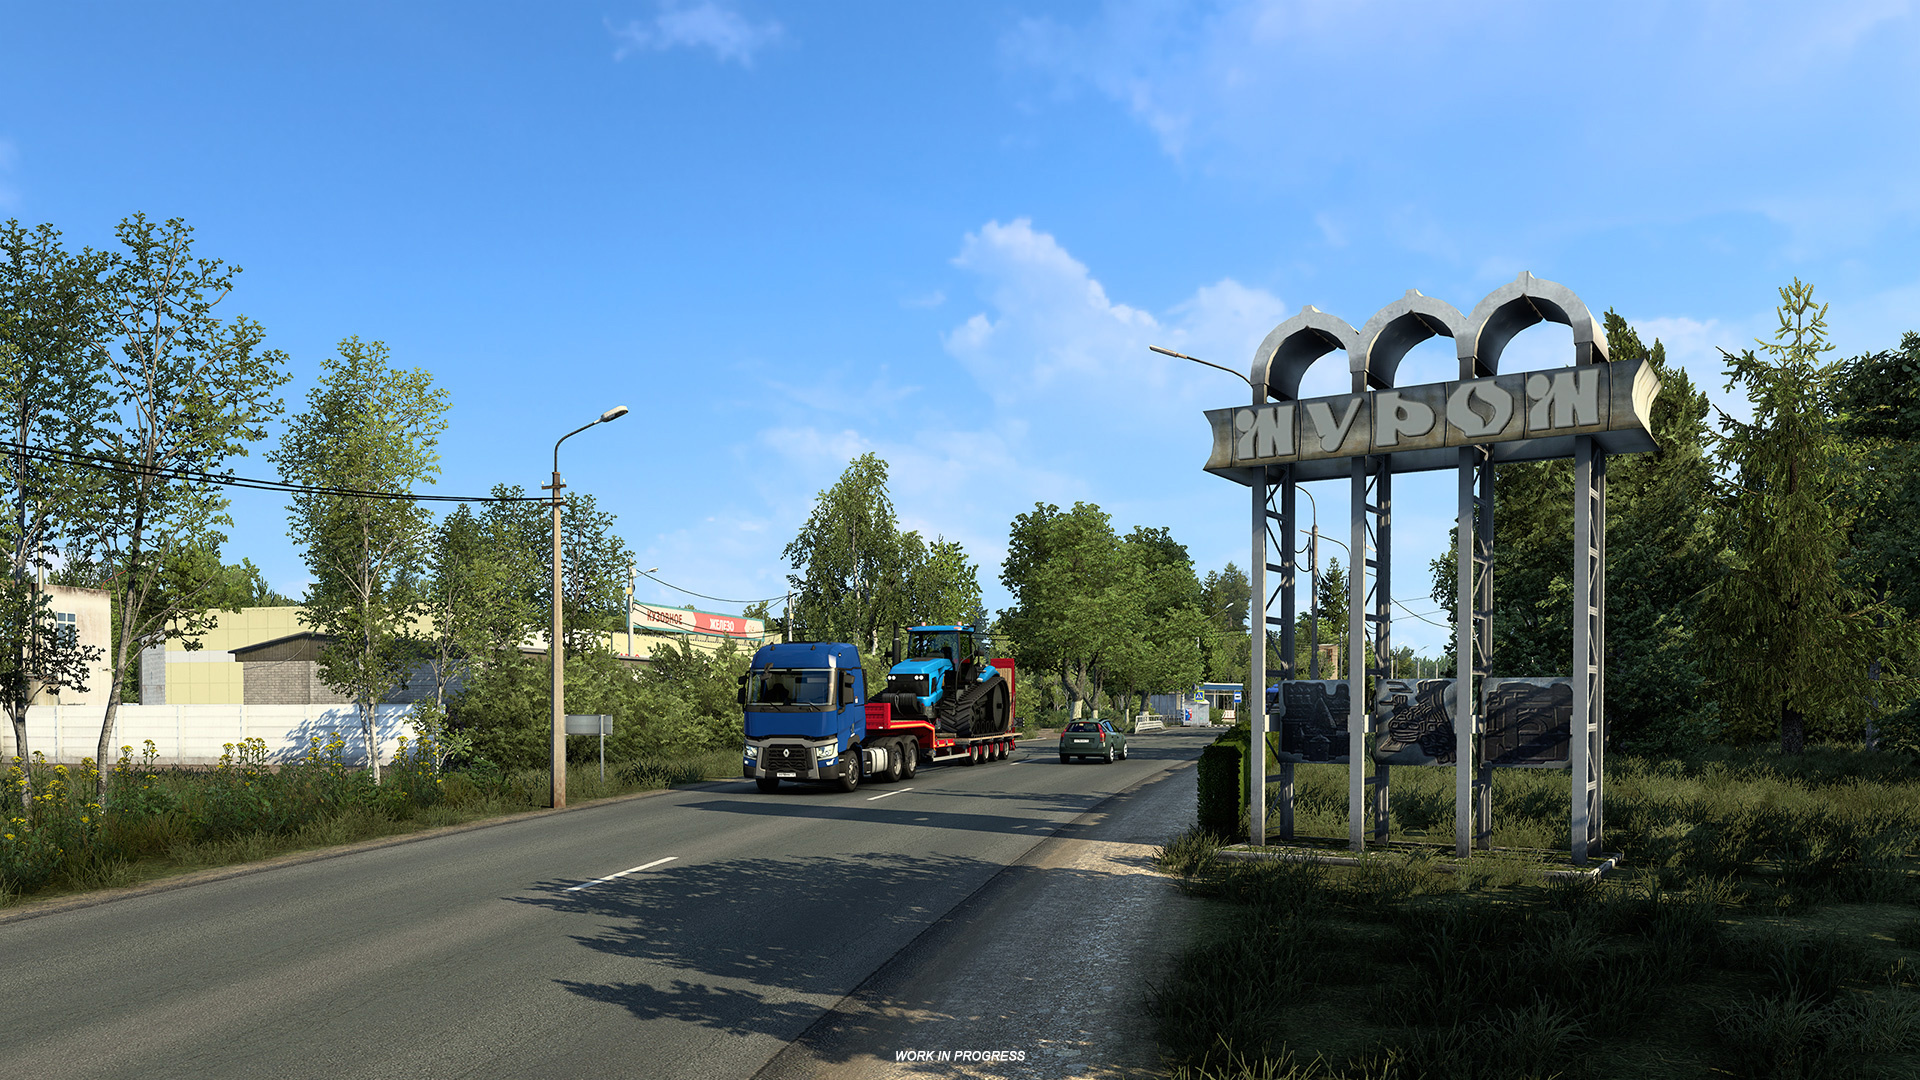 ETS2/ATS on Steam Deck: Official Support Coming Soon  New Hand-held  Portable Gaming PC by Valve 